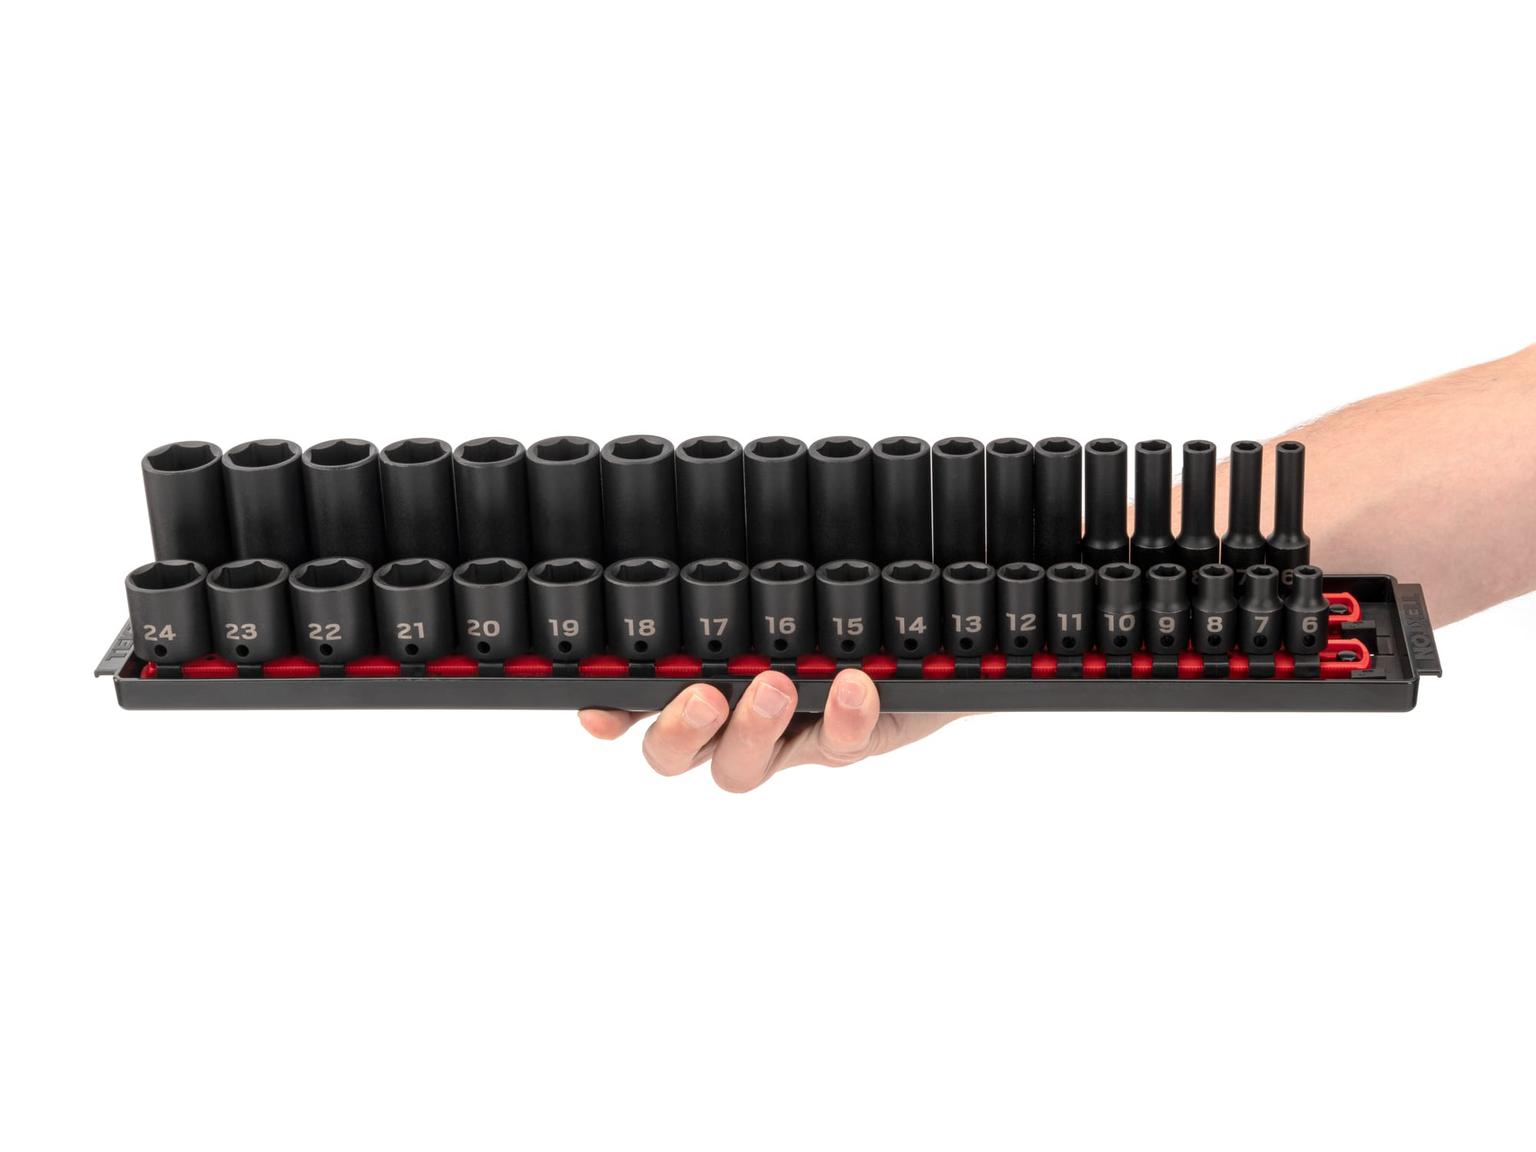 TEKTON SID91218-T 3/8 Inch Drive 6-Point Impact Socket Set with Rails, 68-Piece (1/4-1 in., 6-24 mm)